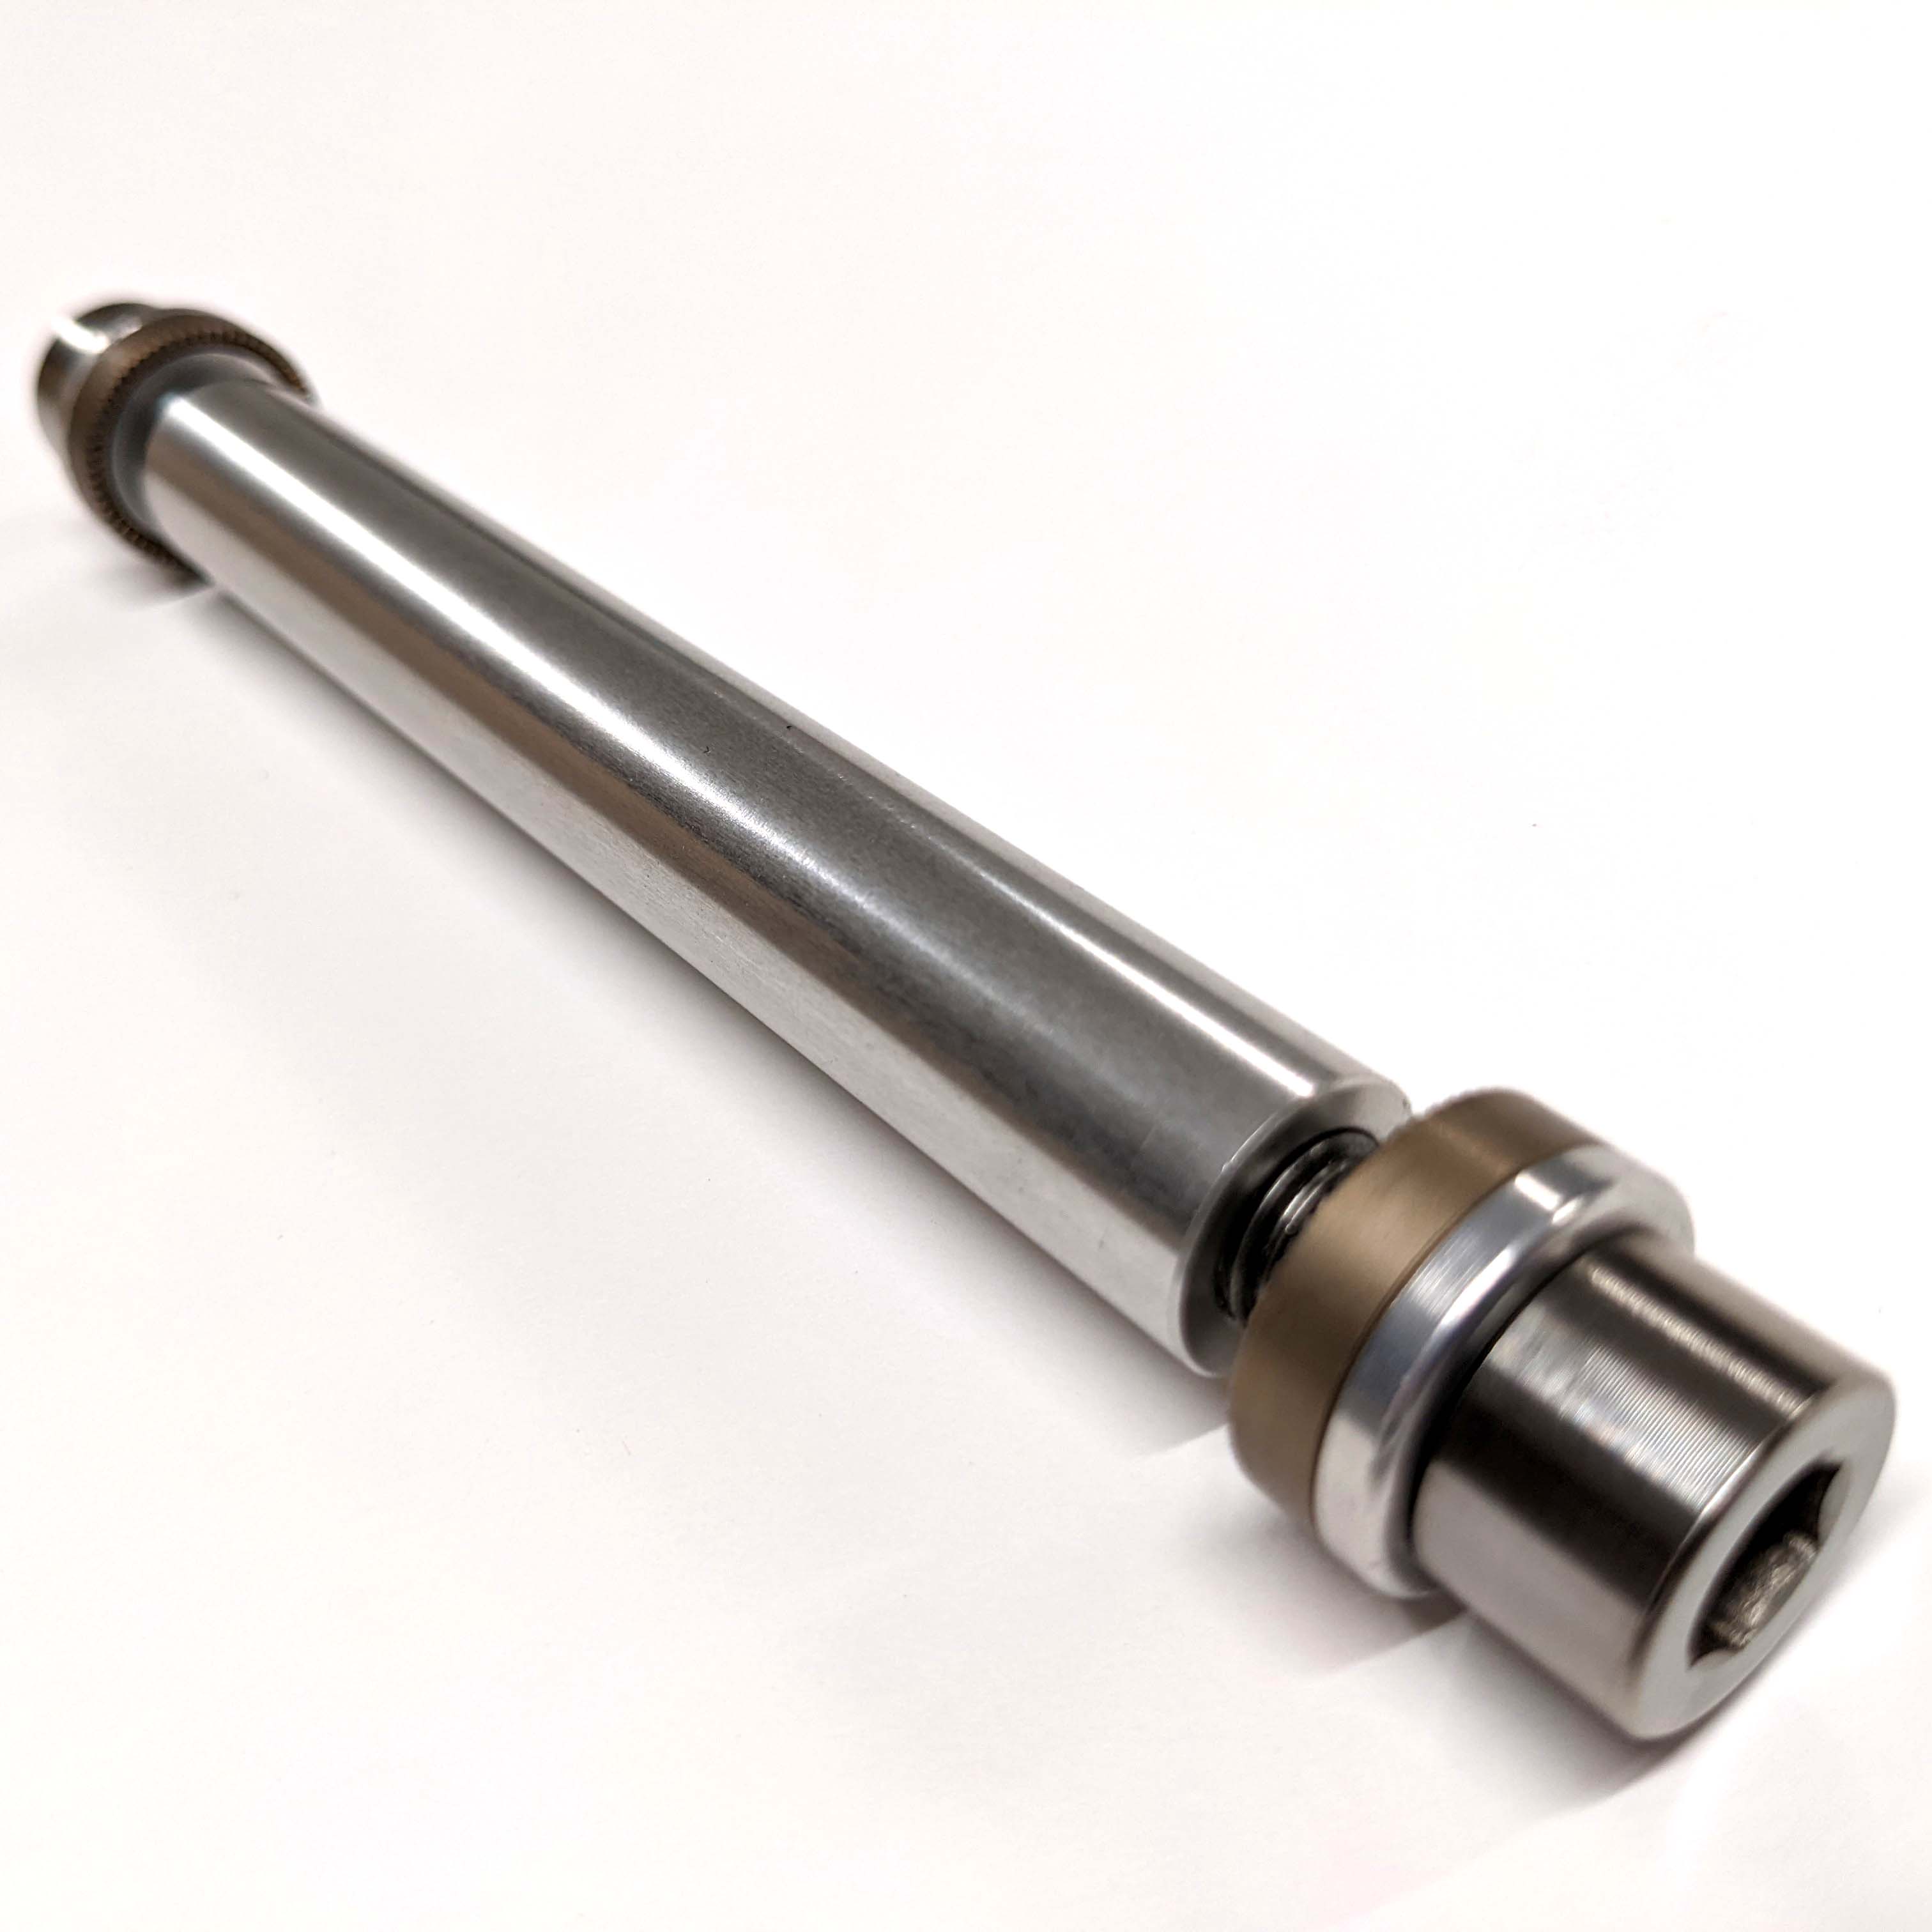 15mm to 10mm bolt-on conversion axle